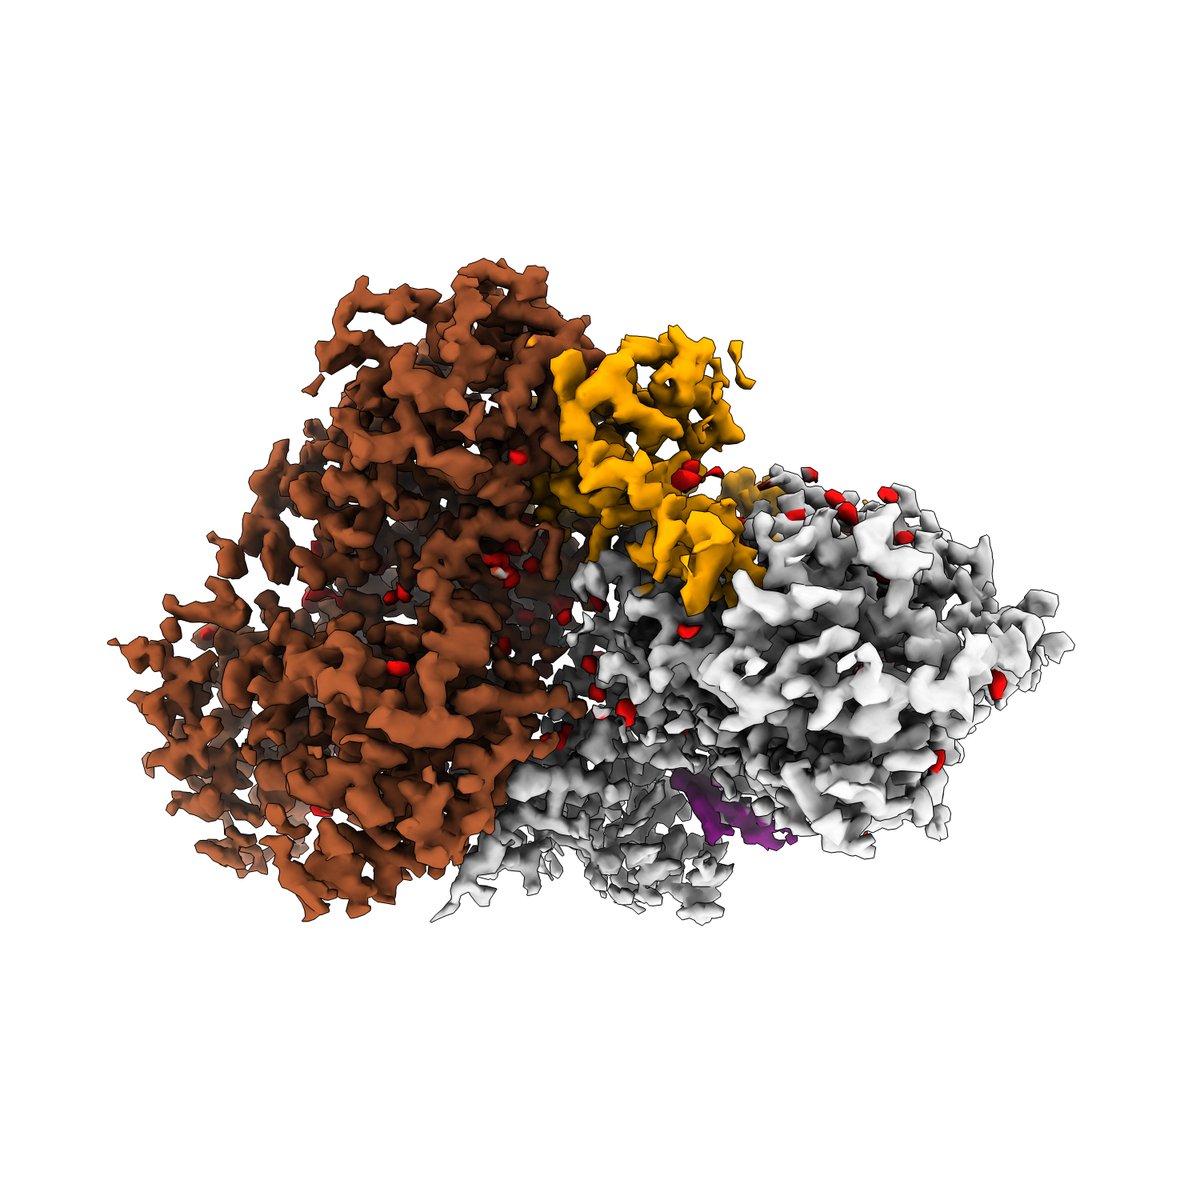 This was missed due to major live events happening around the same time, but we have released some of our high-resolution (2 Å) and rapid screening #cryoEM maps & models of the human CAK bound to small molecules. Paper still under review - more to follow. ebi.ac.uk/emdb/search/cu…